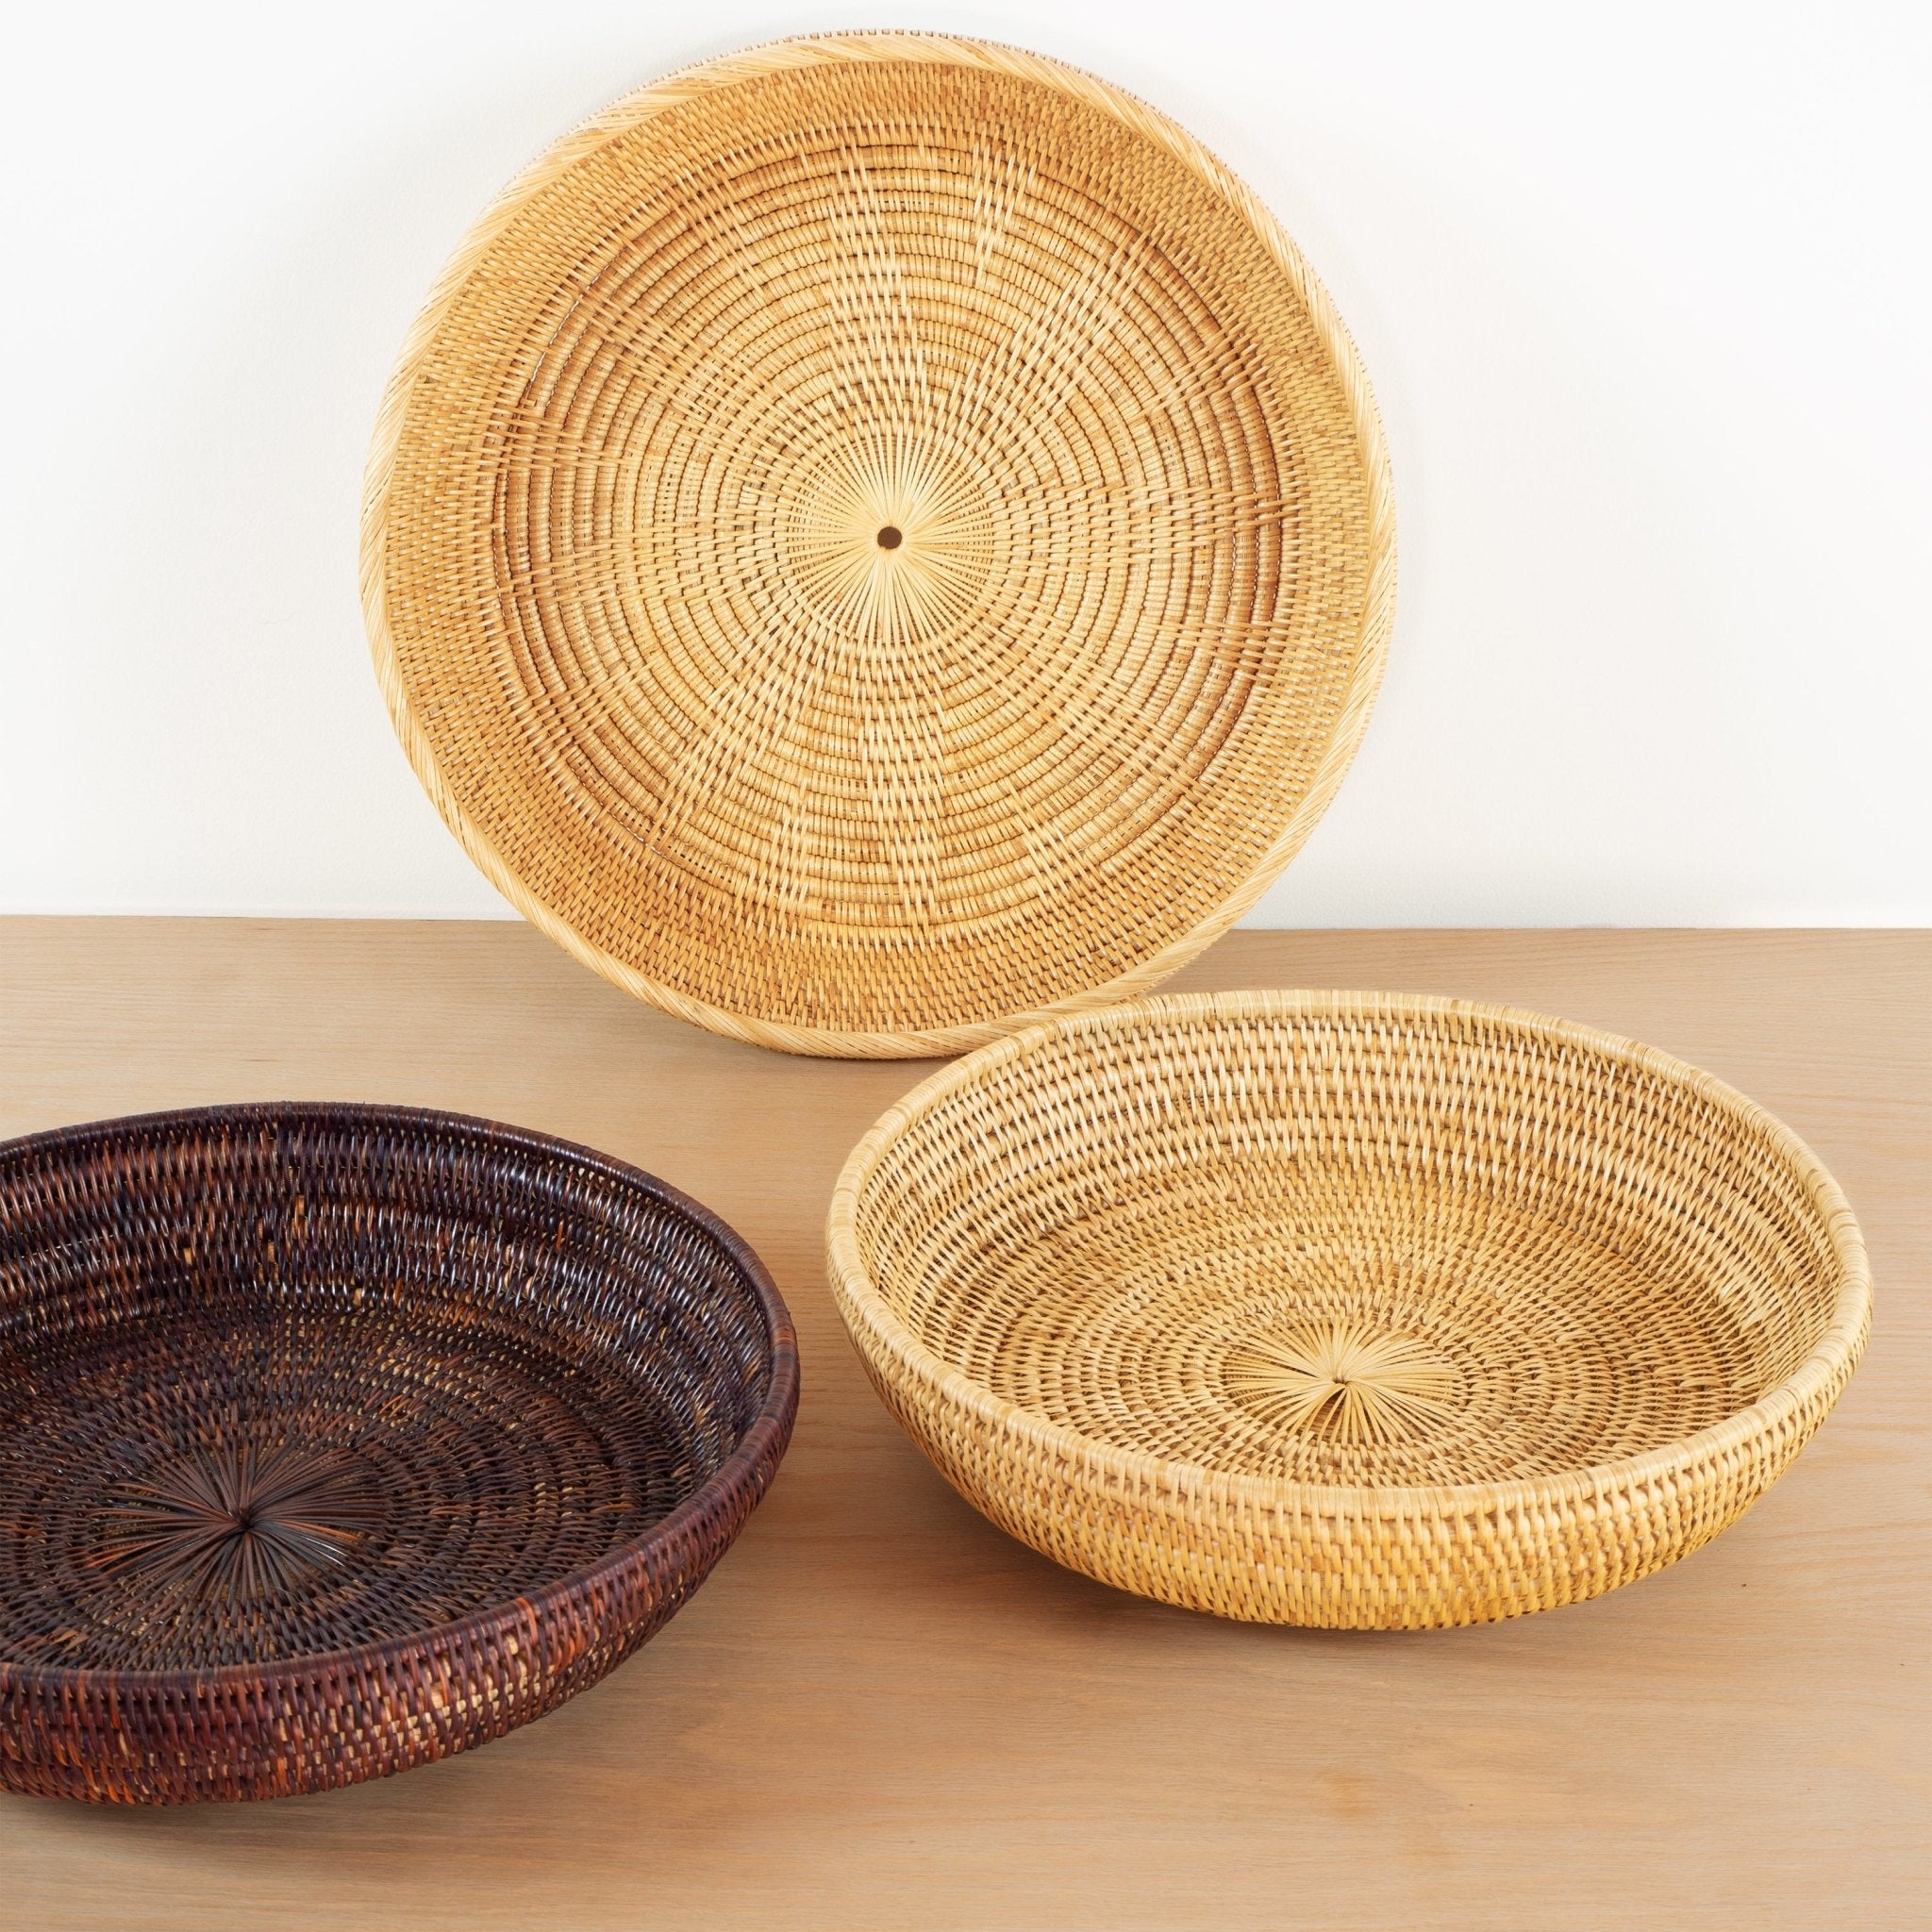 Three handwoven rattan bowls in natural and hand dyed with natural burgundy dye on wooden table.